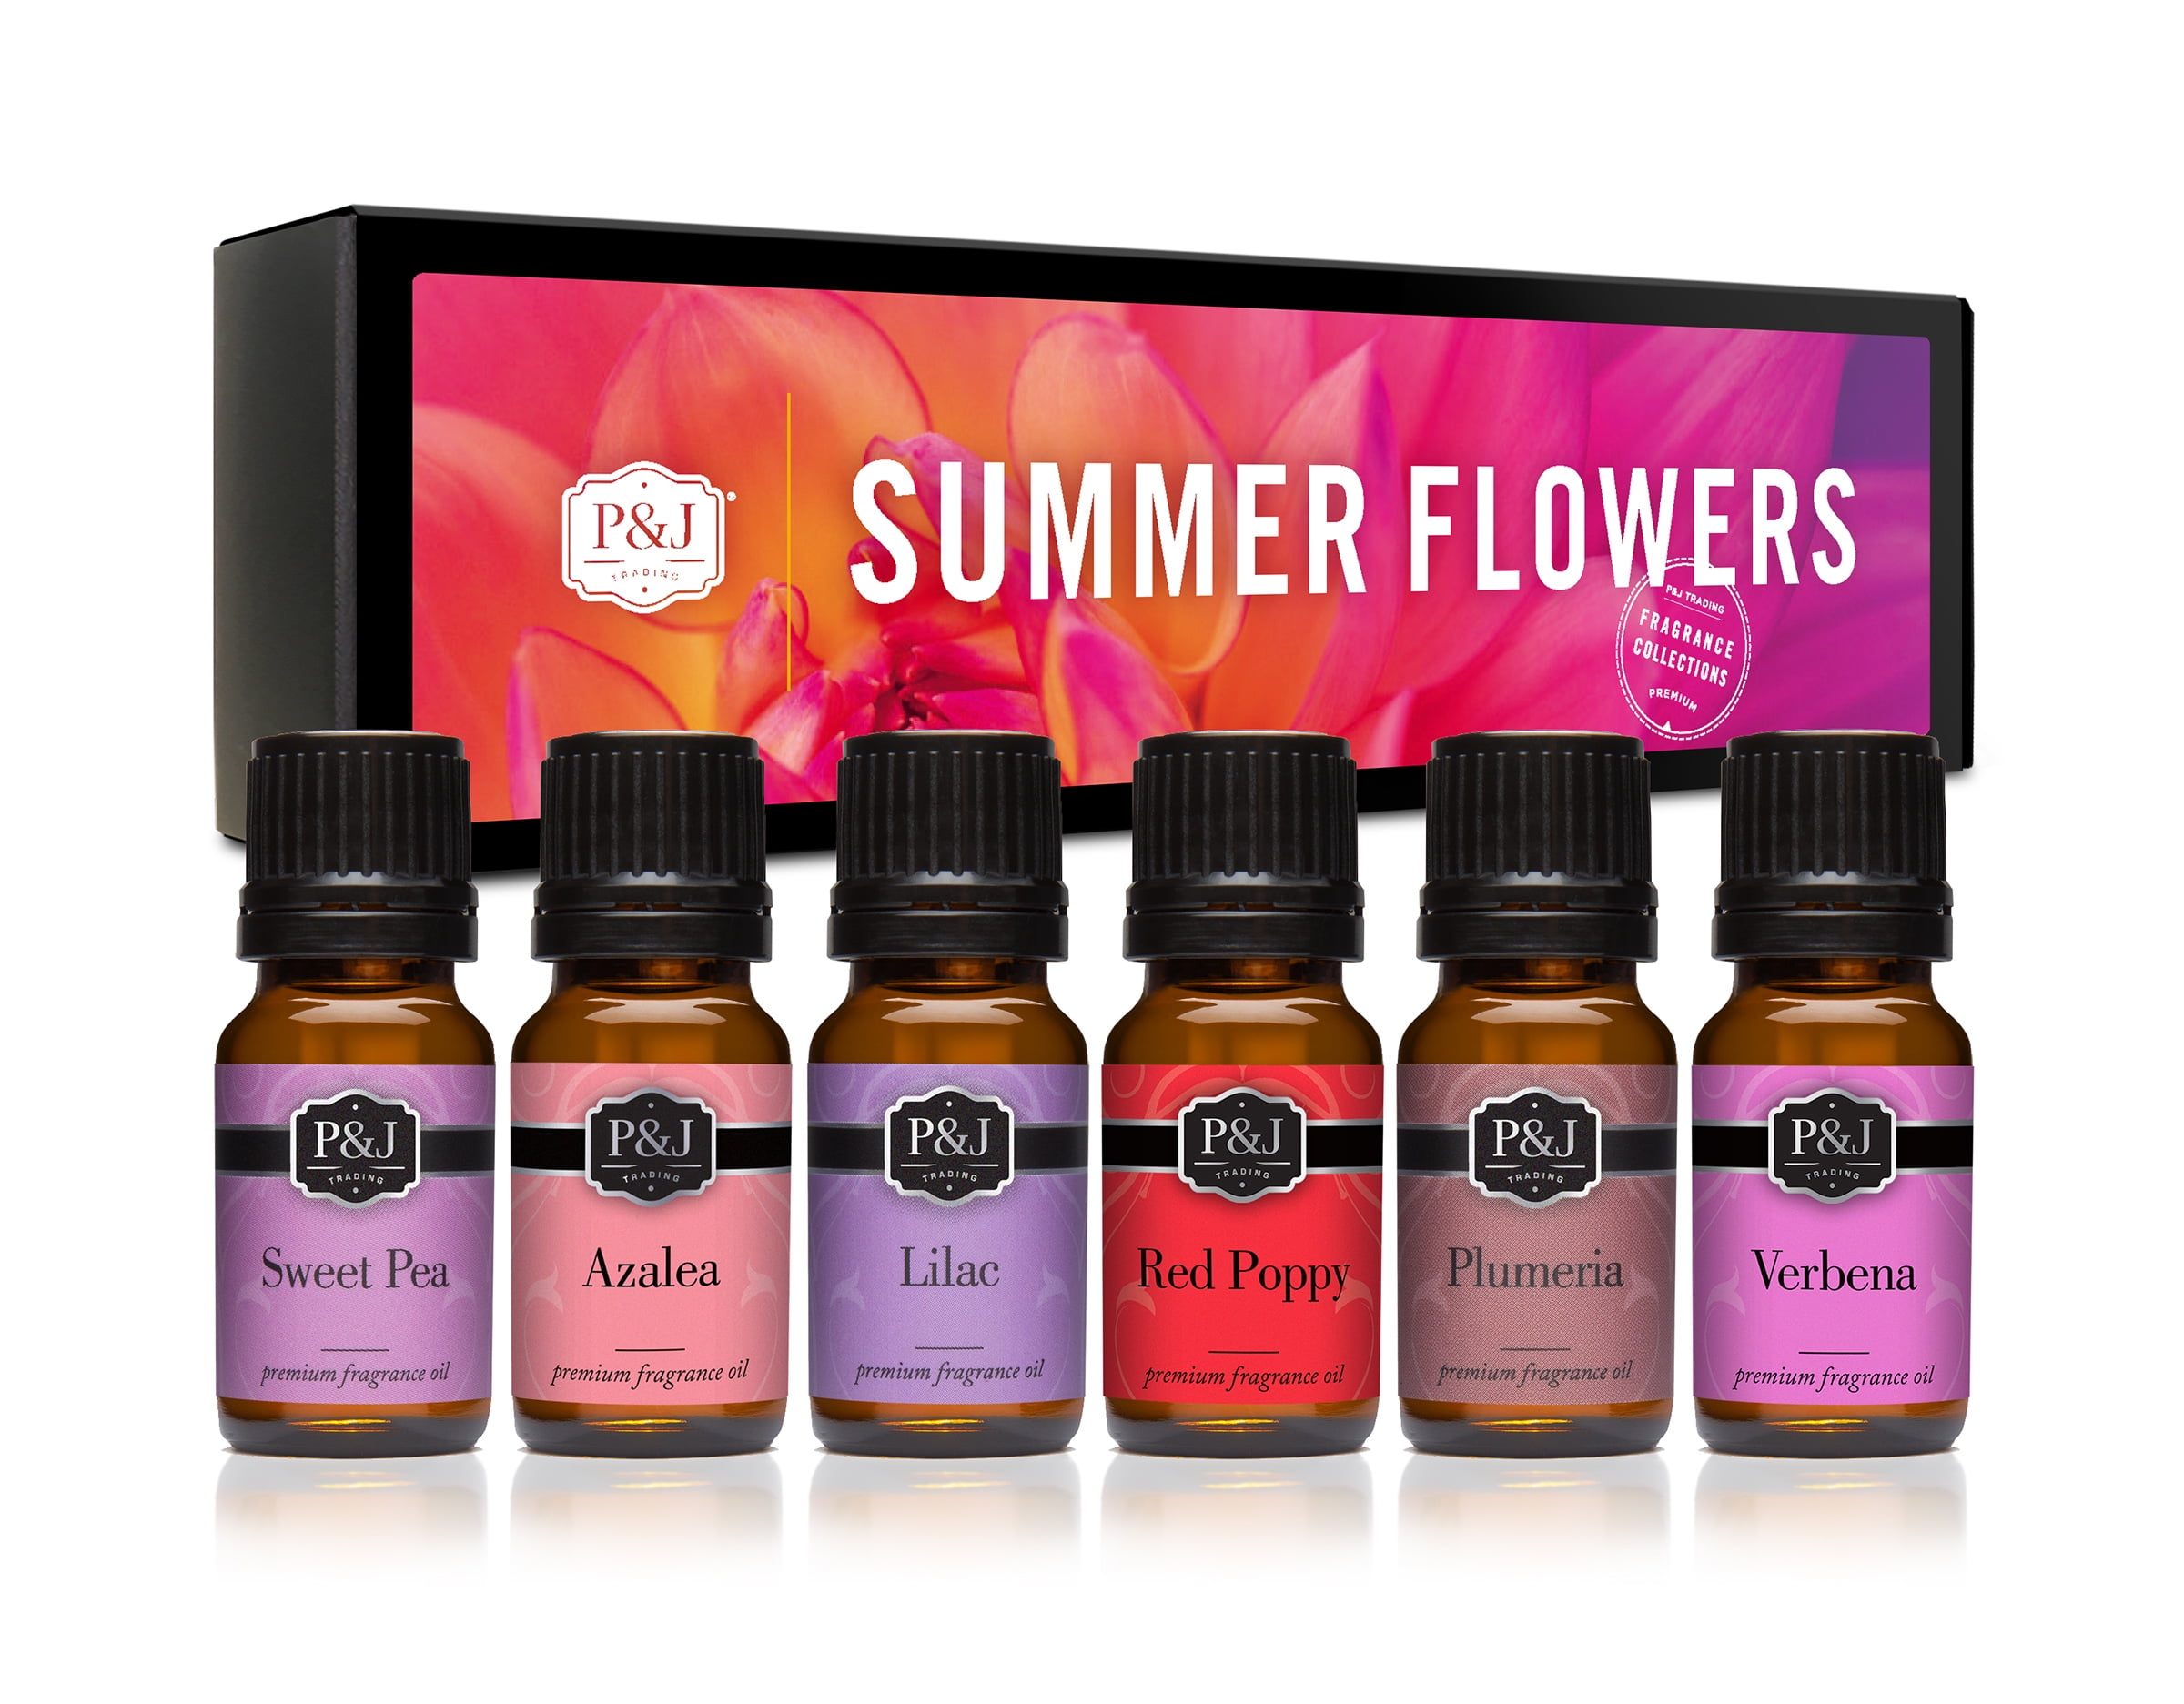  P&J Fragrance Oil Floral Set  Violet, Rose, Freesia, Jasmine,  Lilac, Gardenia, Lily, Woodbine, Azalea, Ylang Ylang, Sweet Pea, Plumeria,  Lavender, Bamboo Candle Scents for Candle Making : Arts, Crafts 